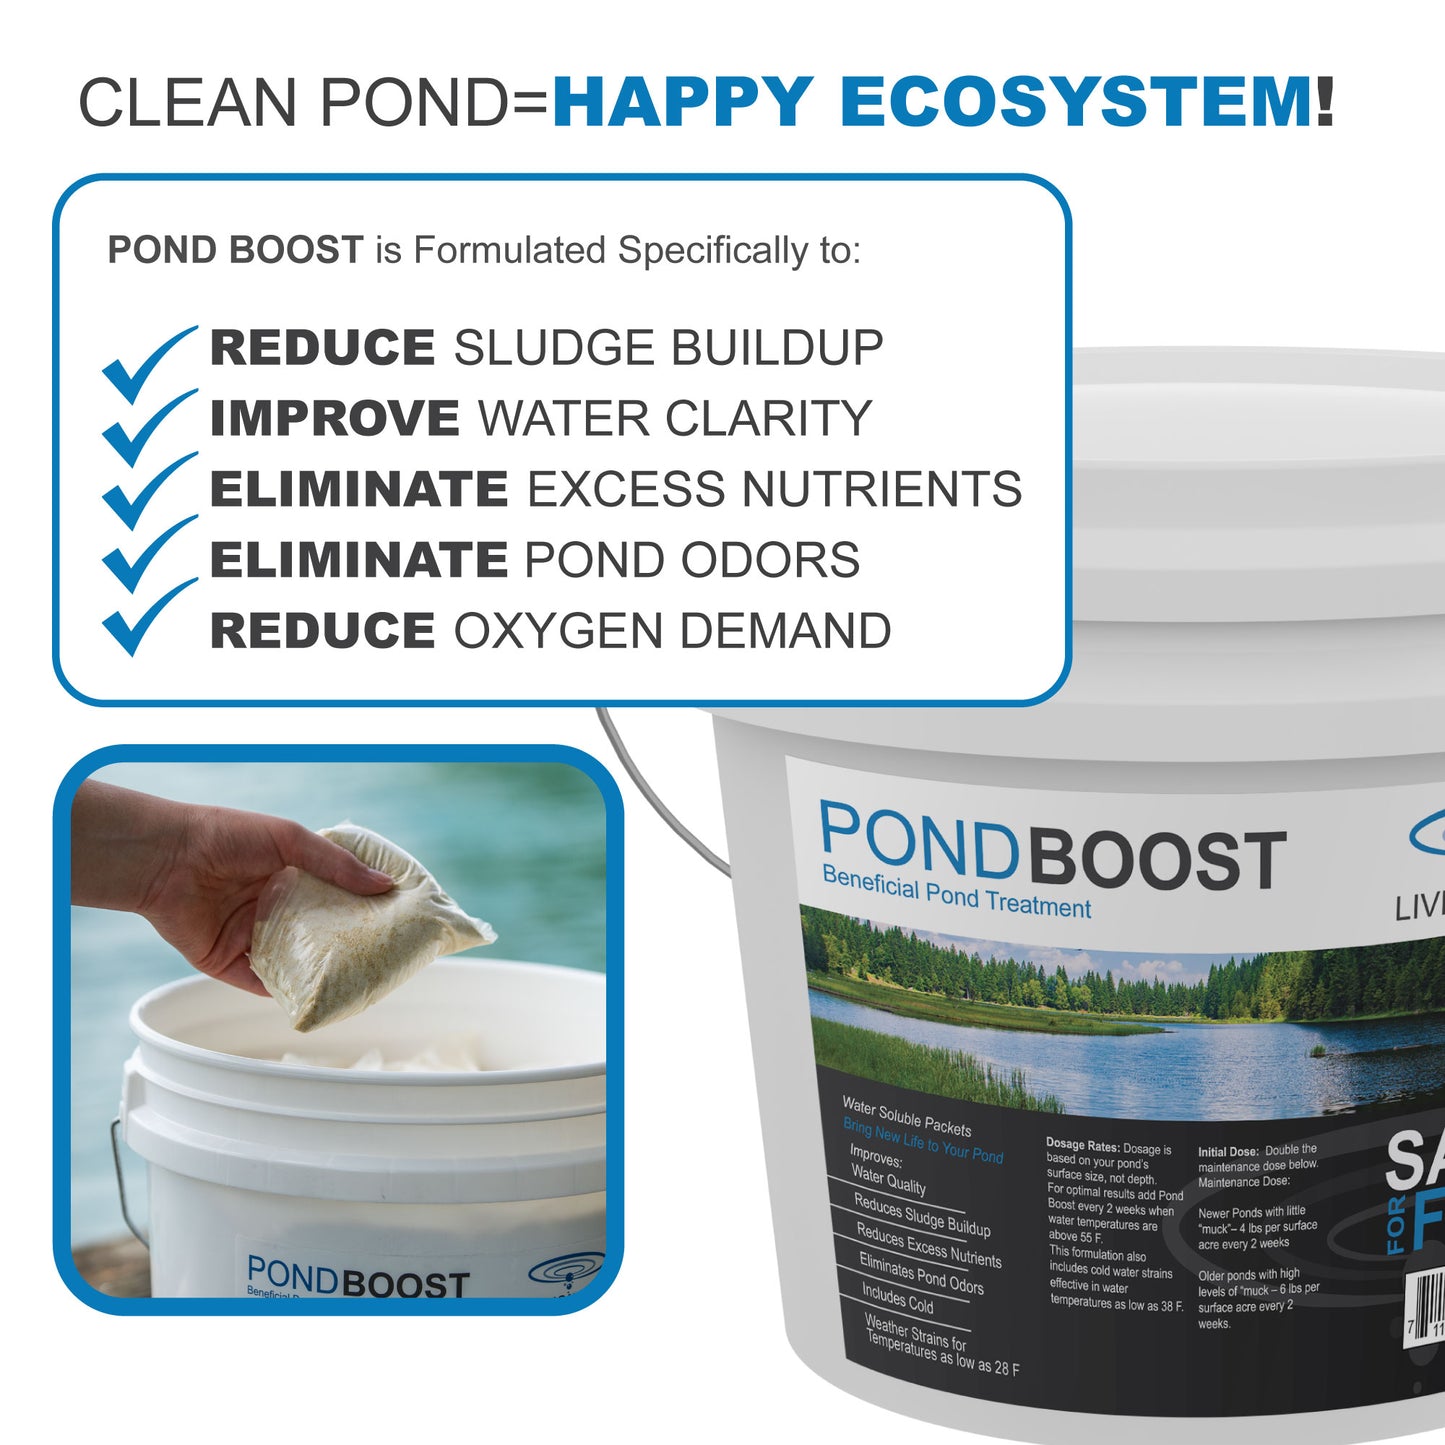 Pond Boost Beneficial Bacteria - Living Water Aeration